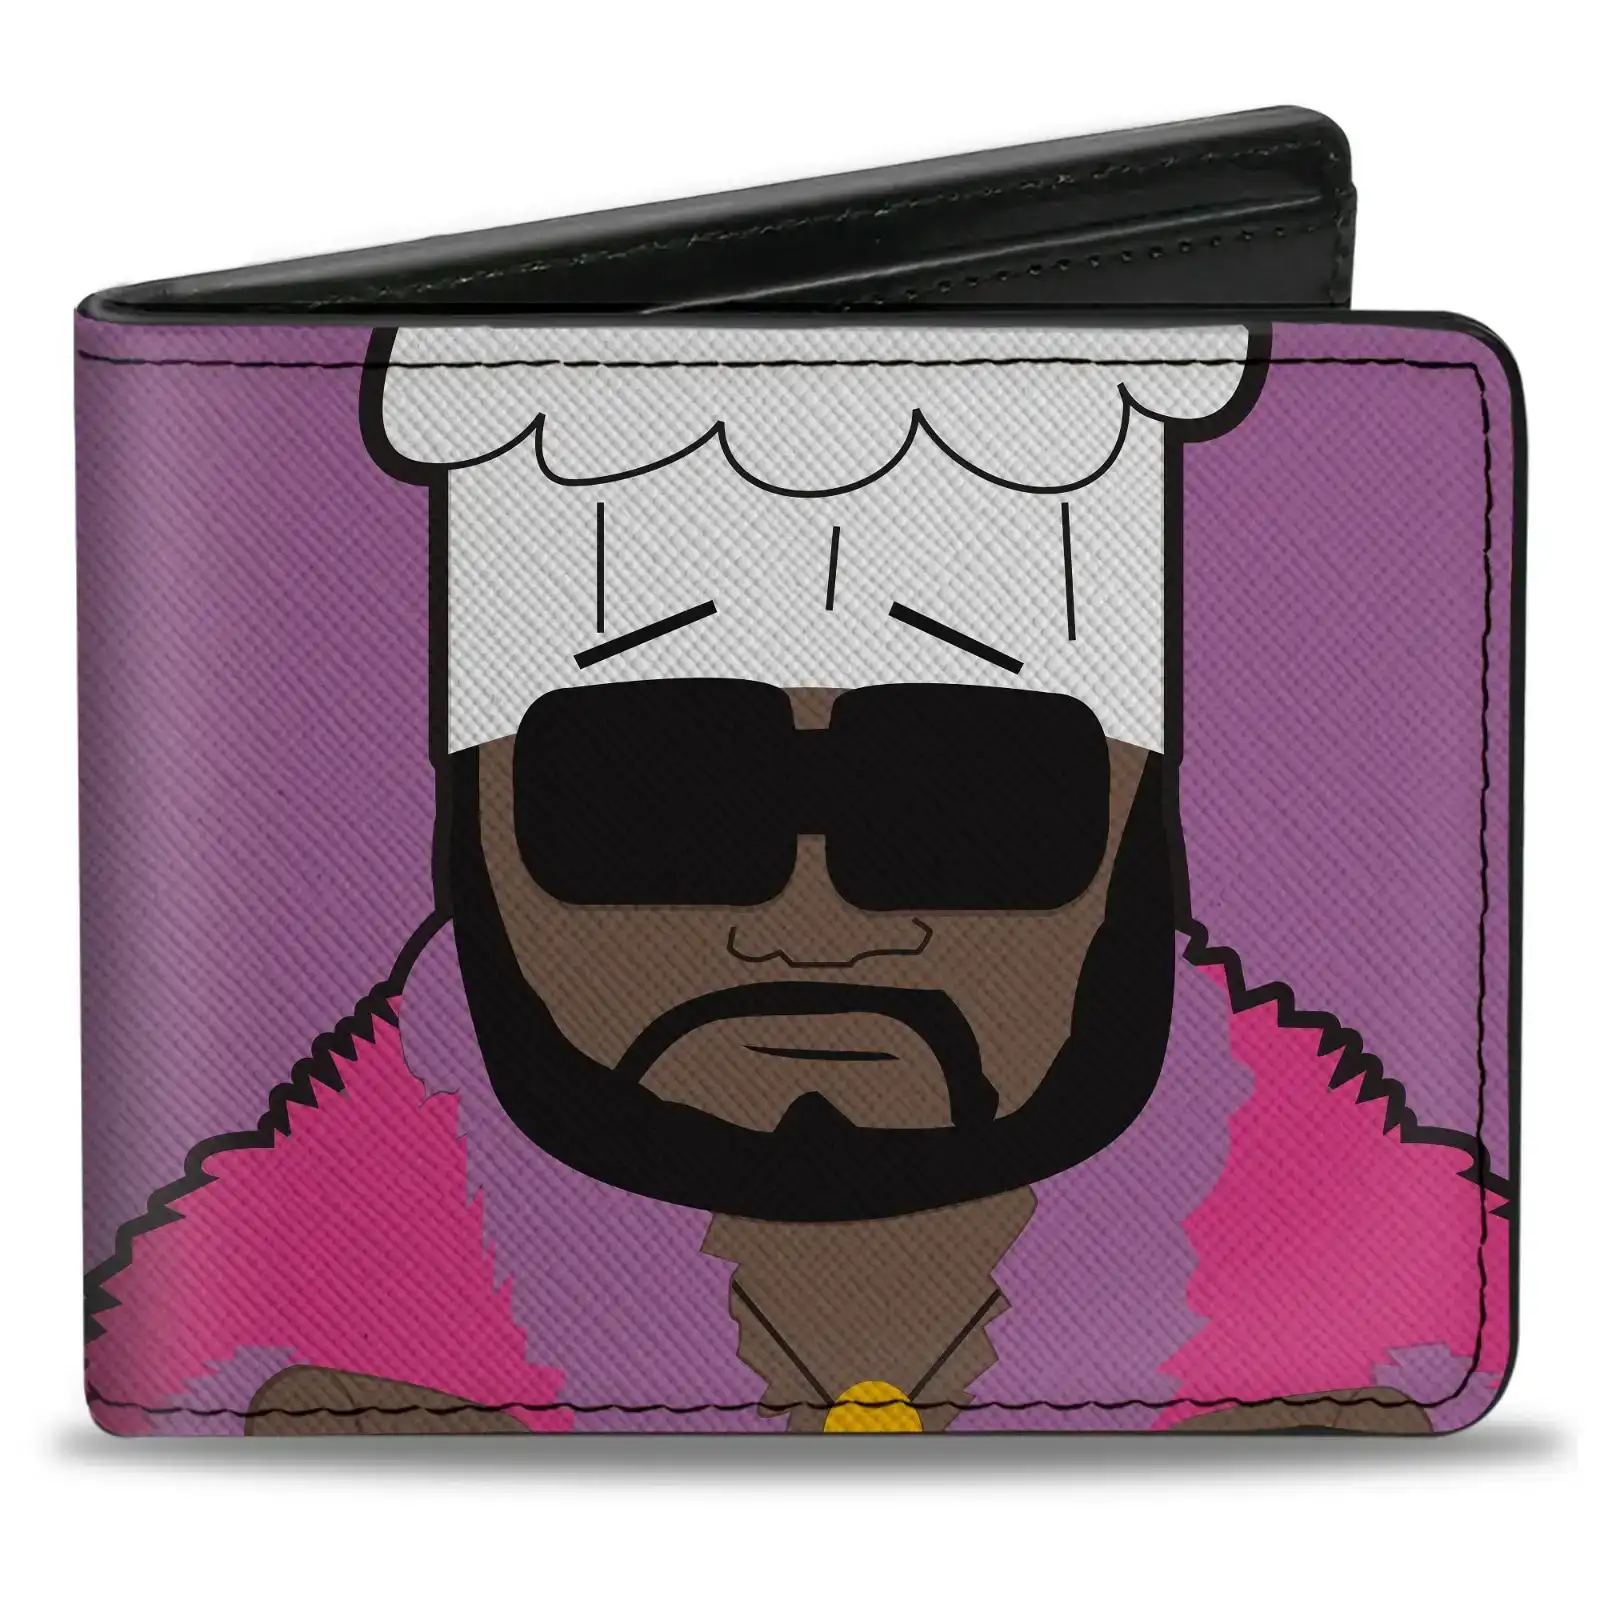 Image of Bi-Fold Wallet - South Park CHEF Pose and Text Purple